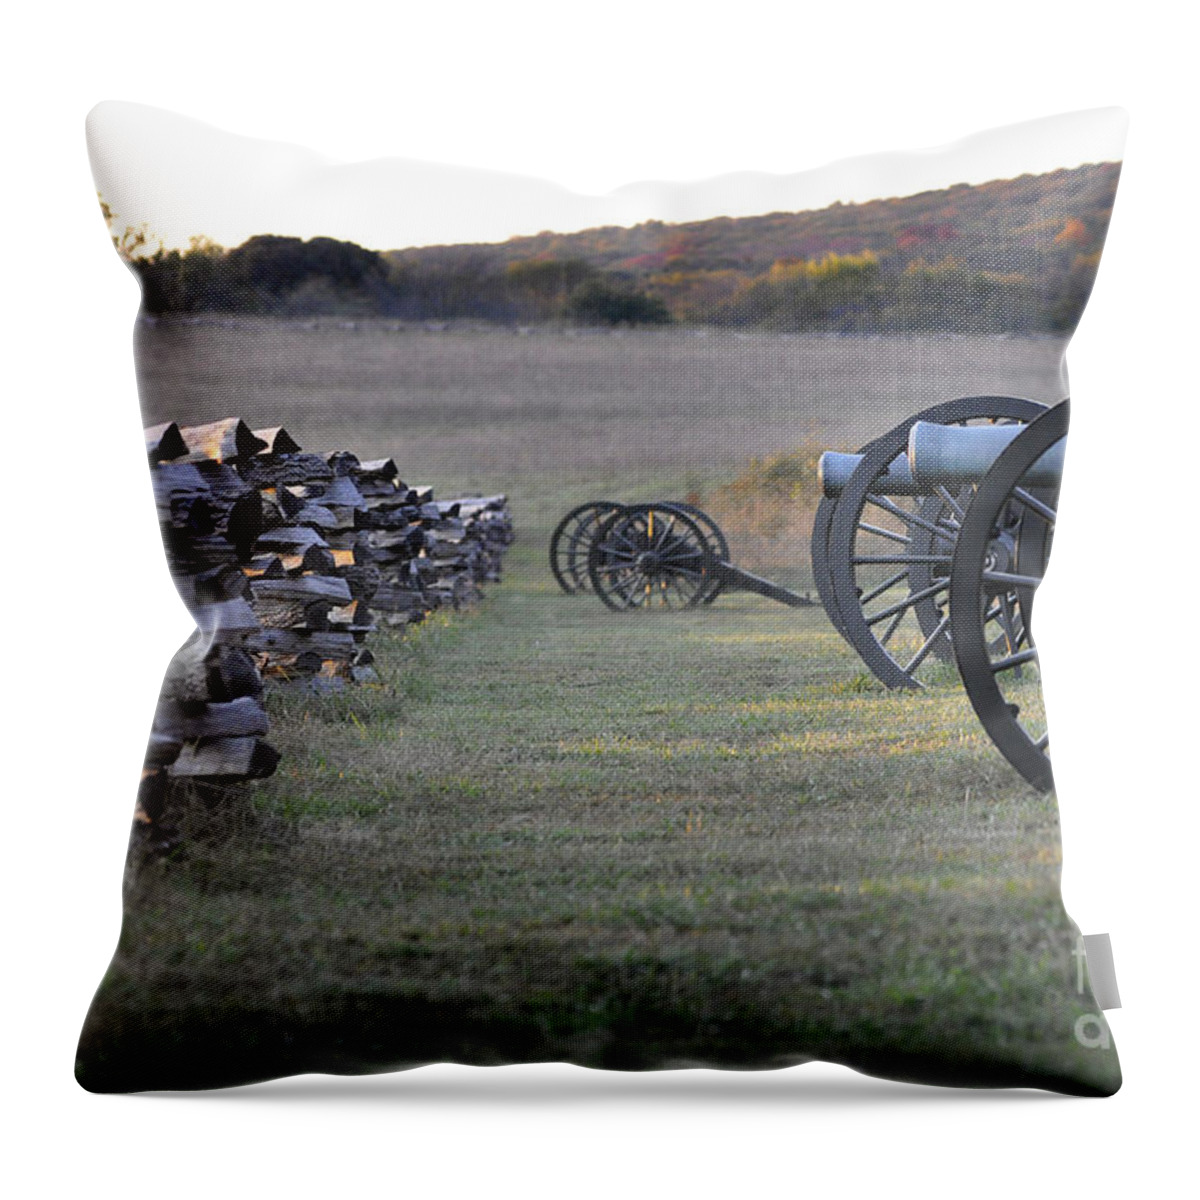 National Park Throw Pillow featuring the photograph Silent Battlefield by Nava Thompson